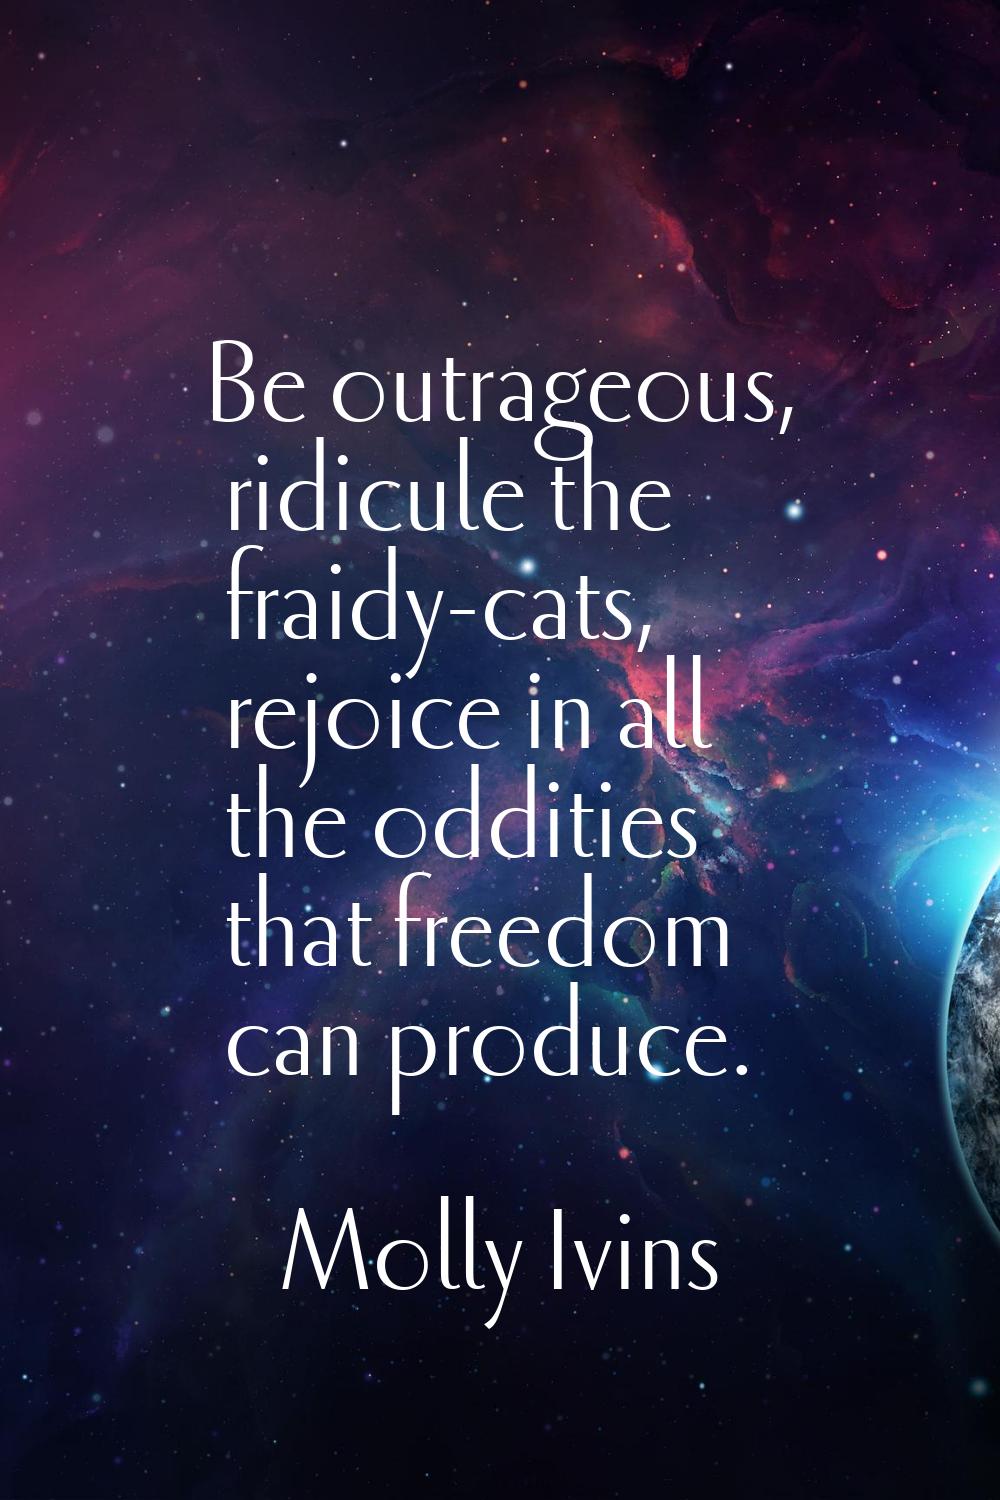 Be outrageous, ridicule the fraidy-cats, rejoice in all the oddities that freedom can produce.